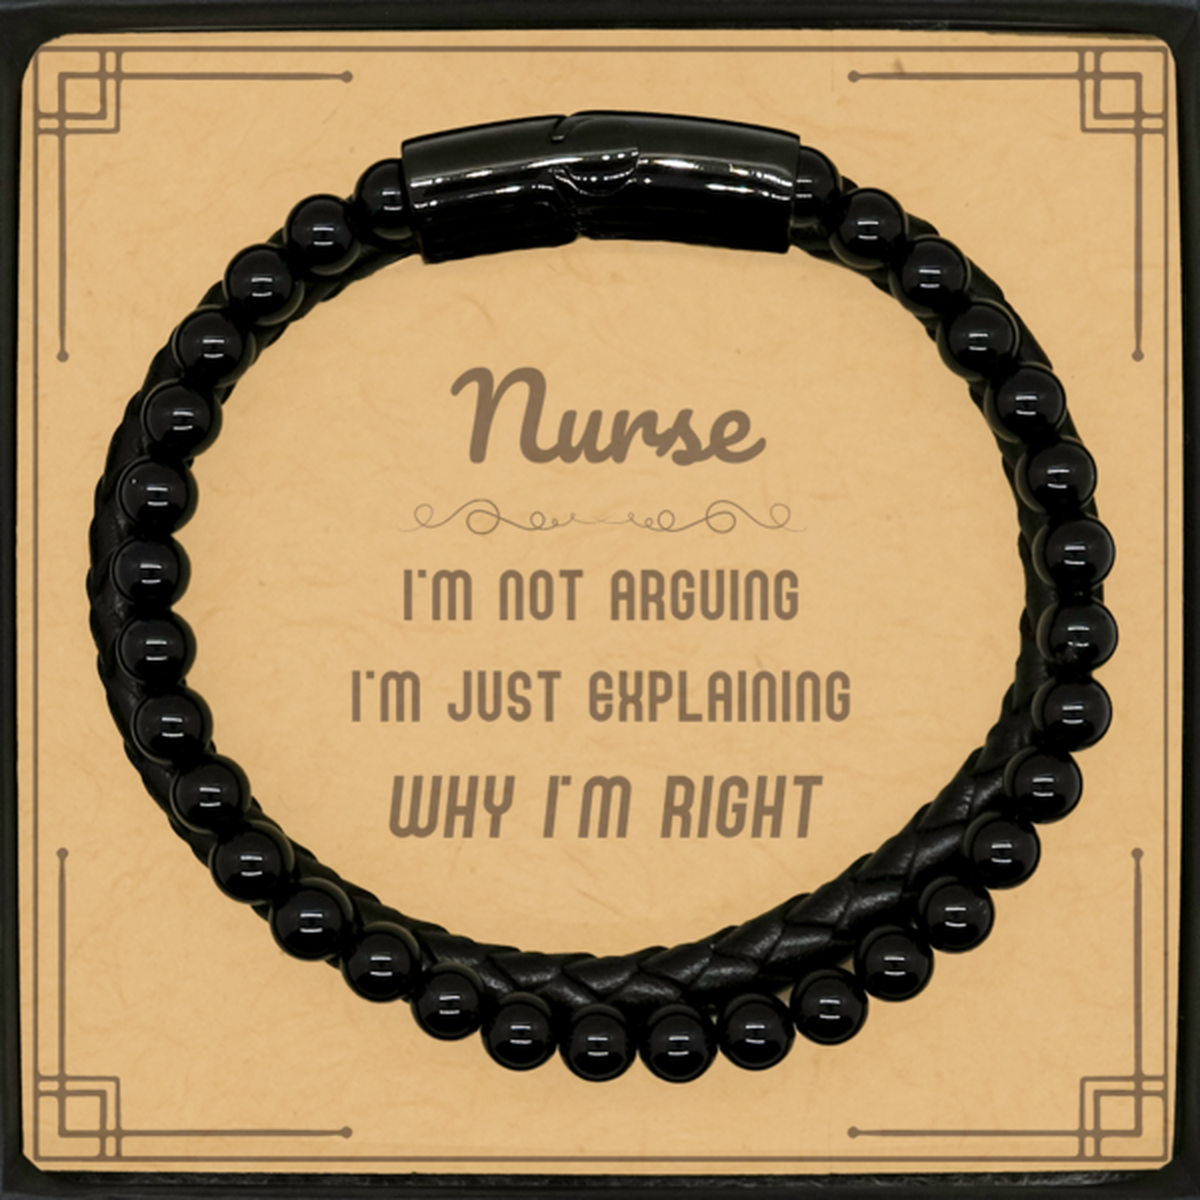 Nurse I'm not Arguing. I'm Just Explaining Why I'm RIGHT Stone Leather Bracelets, Funny Saying Quote Nurse Gifts For Nurse Message Card Graduation Birthday Christmas Gifts for Men Women Coworker